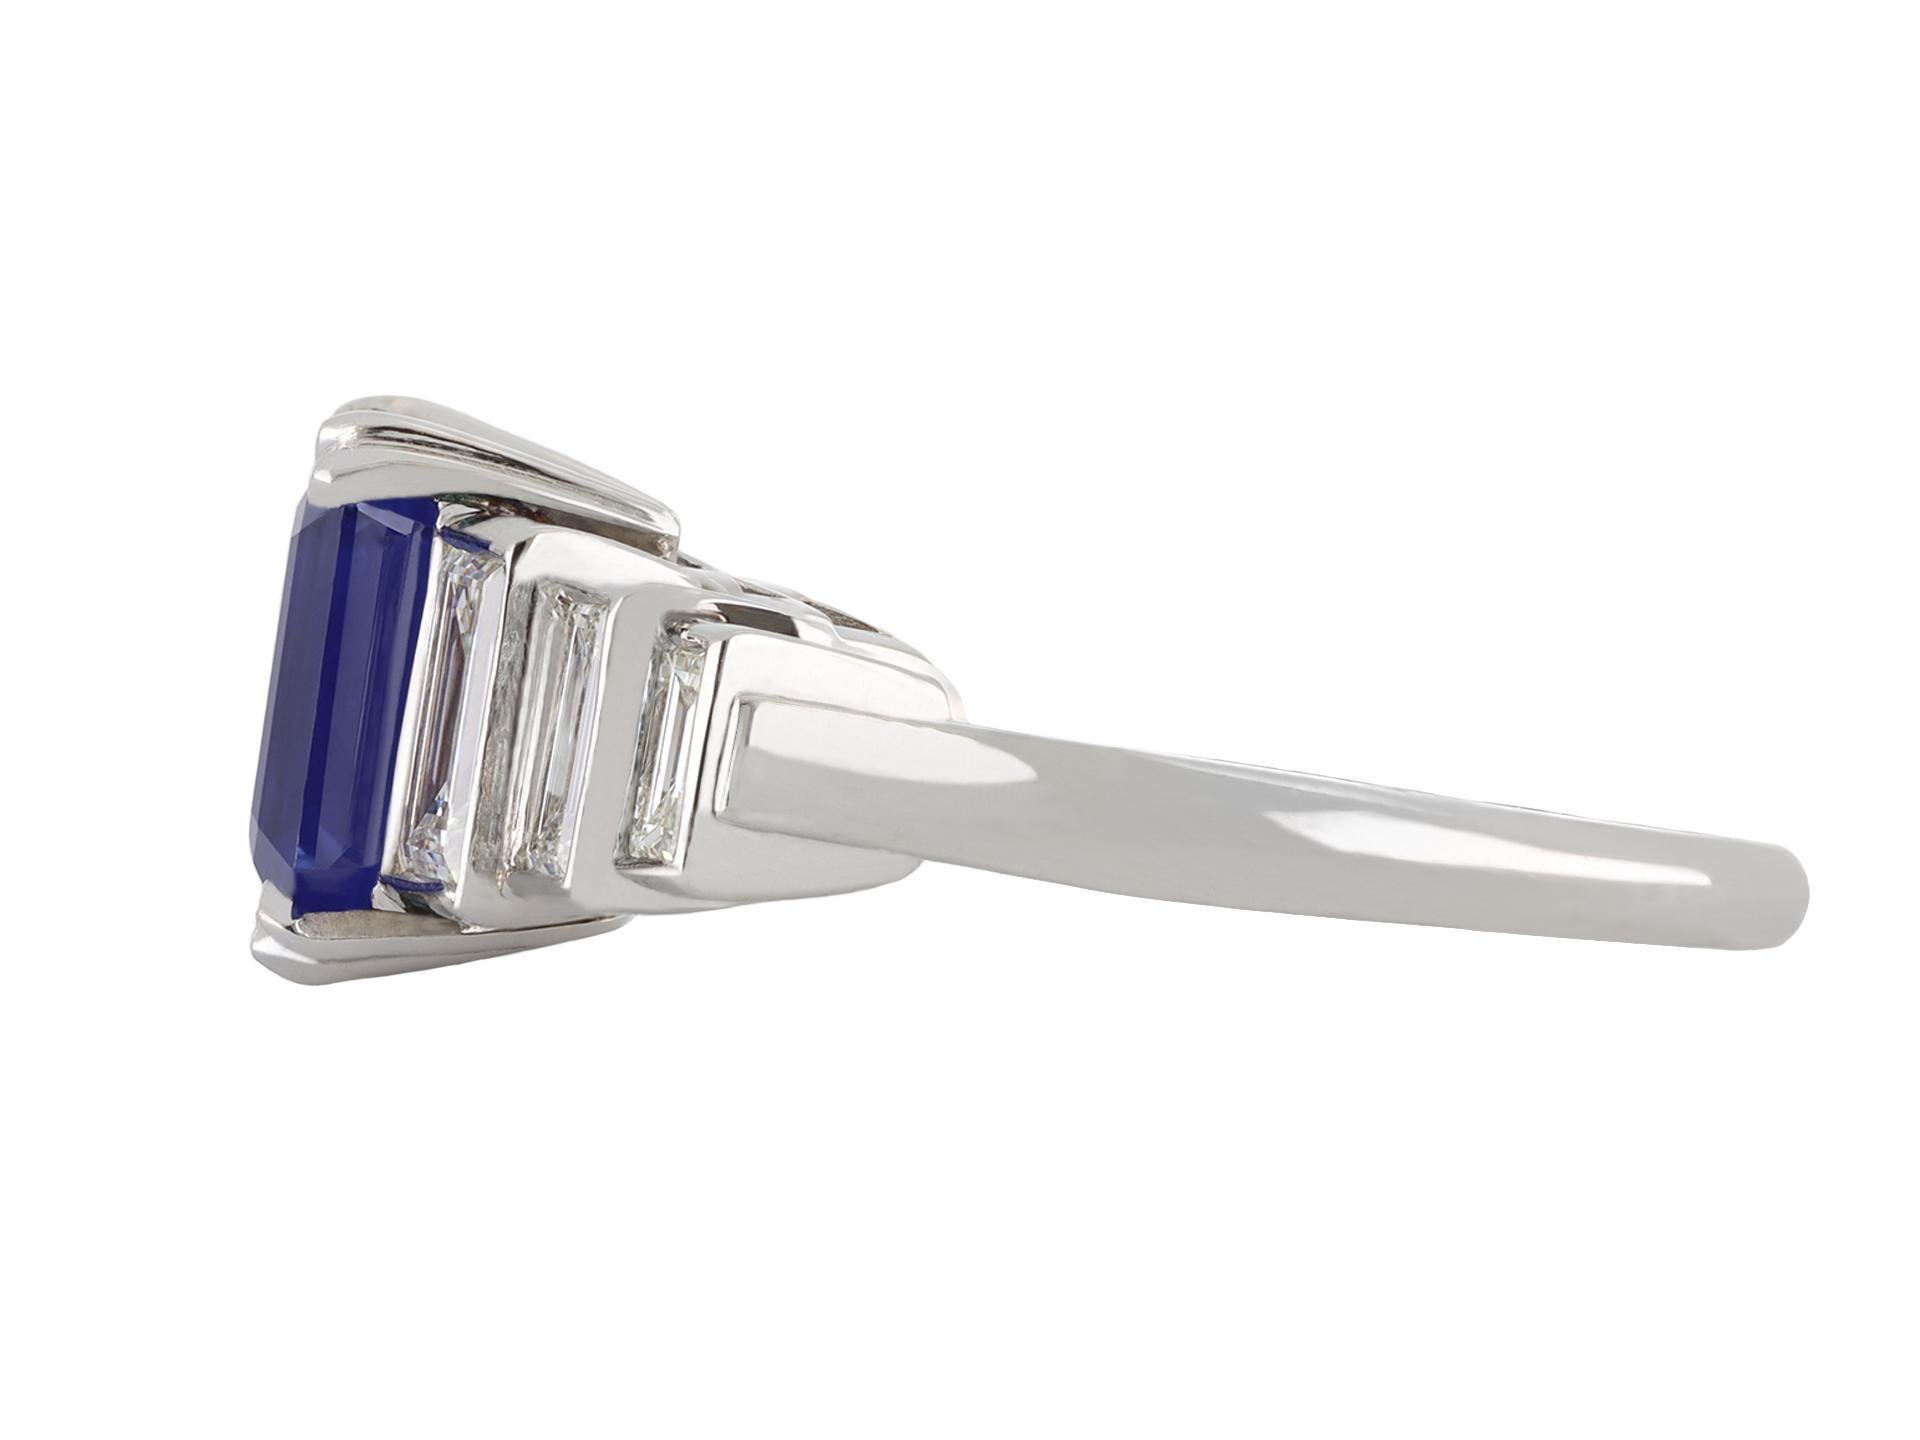 Kashmir sapphire and diamond ring. Centrally set with a rectangular emerald-cut natural unenhanced Kashmir sapphire in an open back claw setting with an approximate weight of 2.12 carats, further set with six tapered rectangular baguette cut